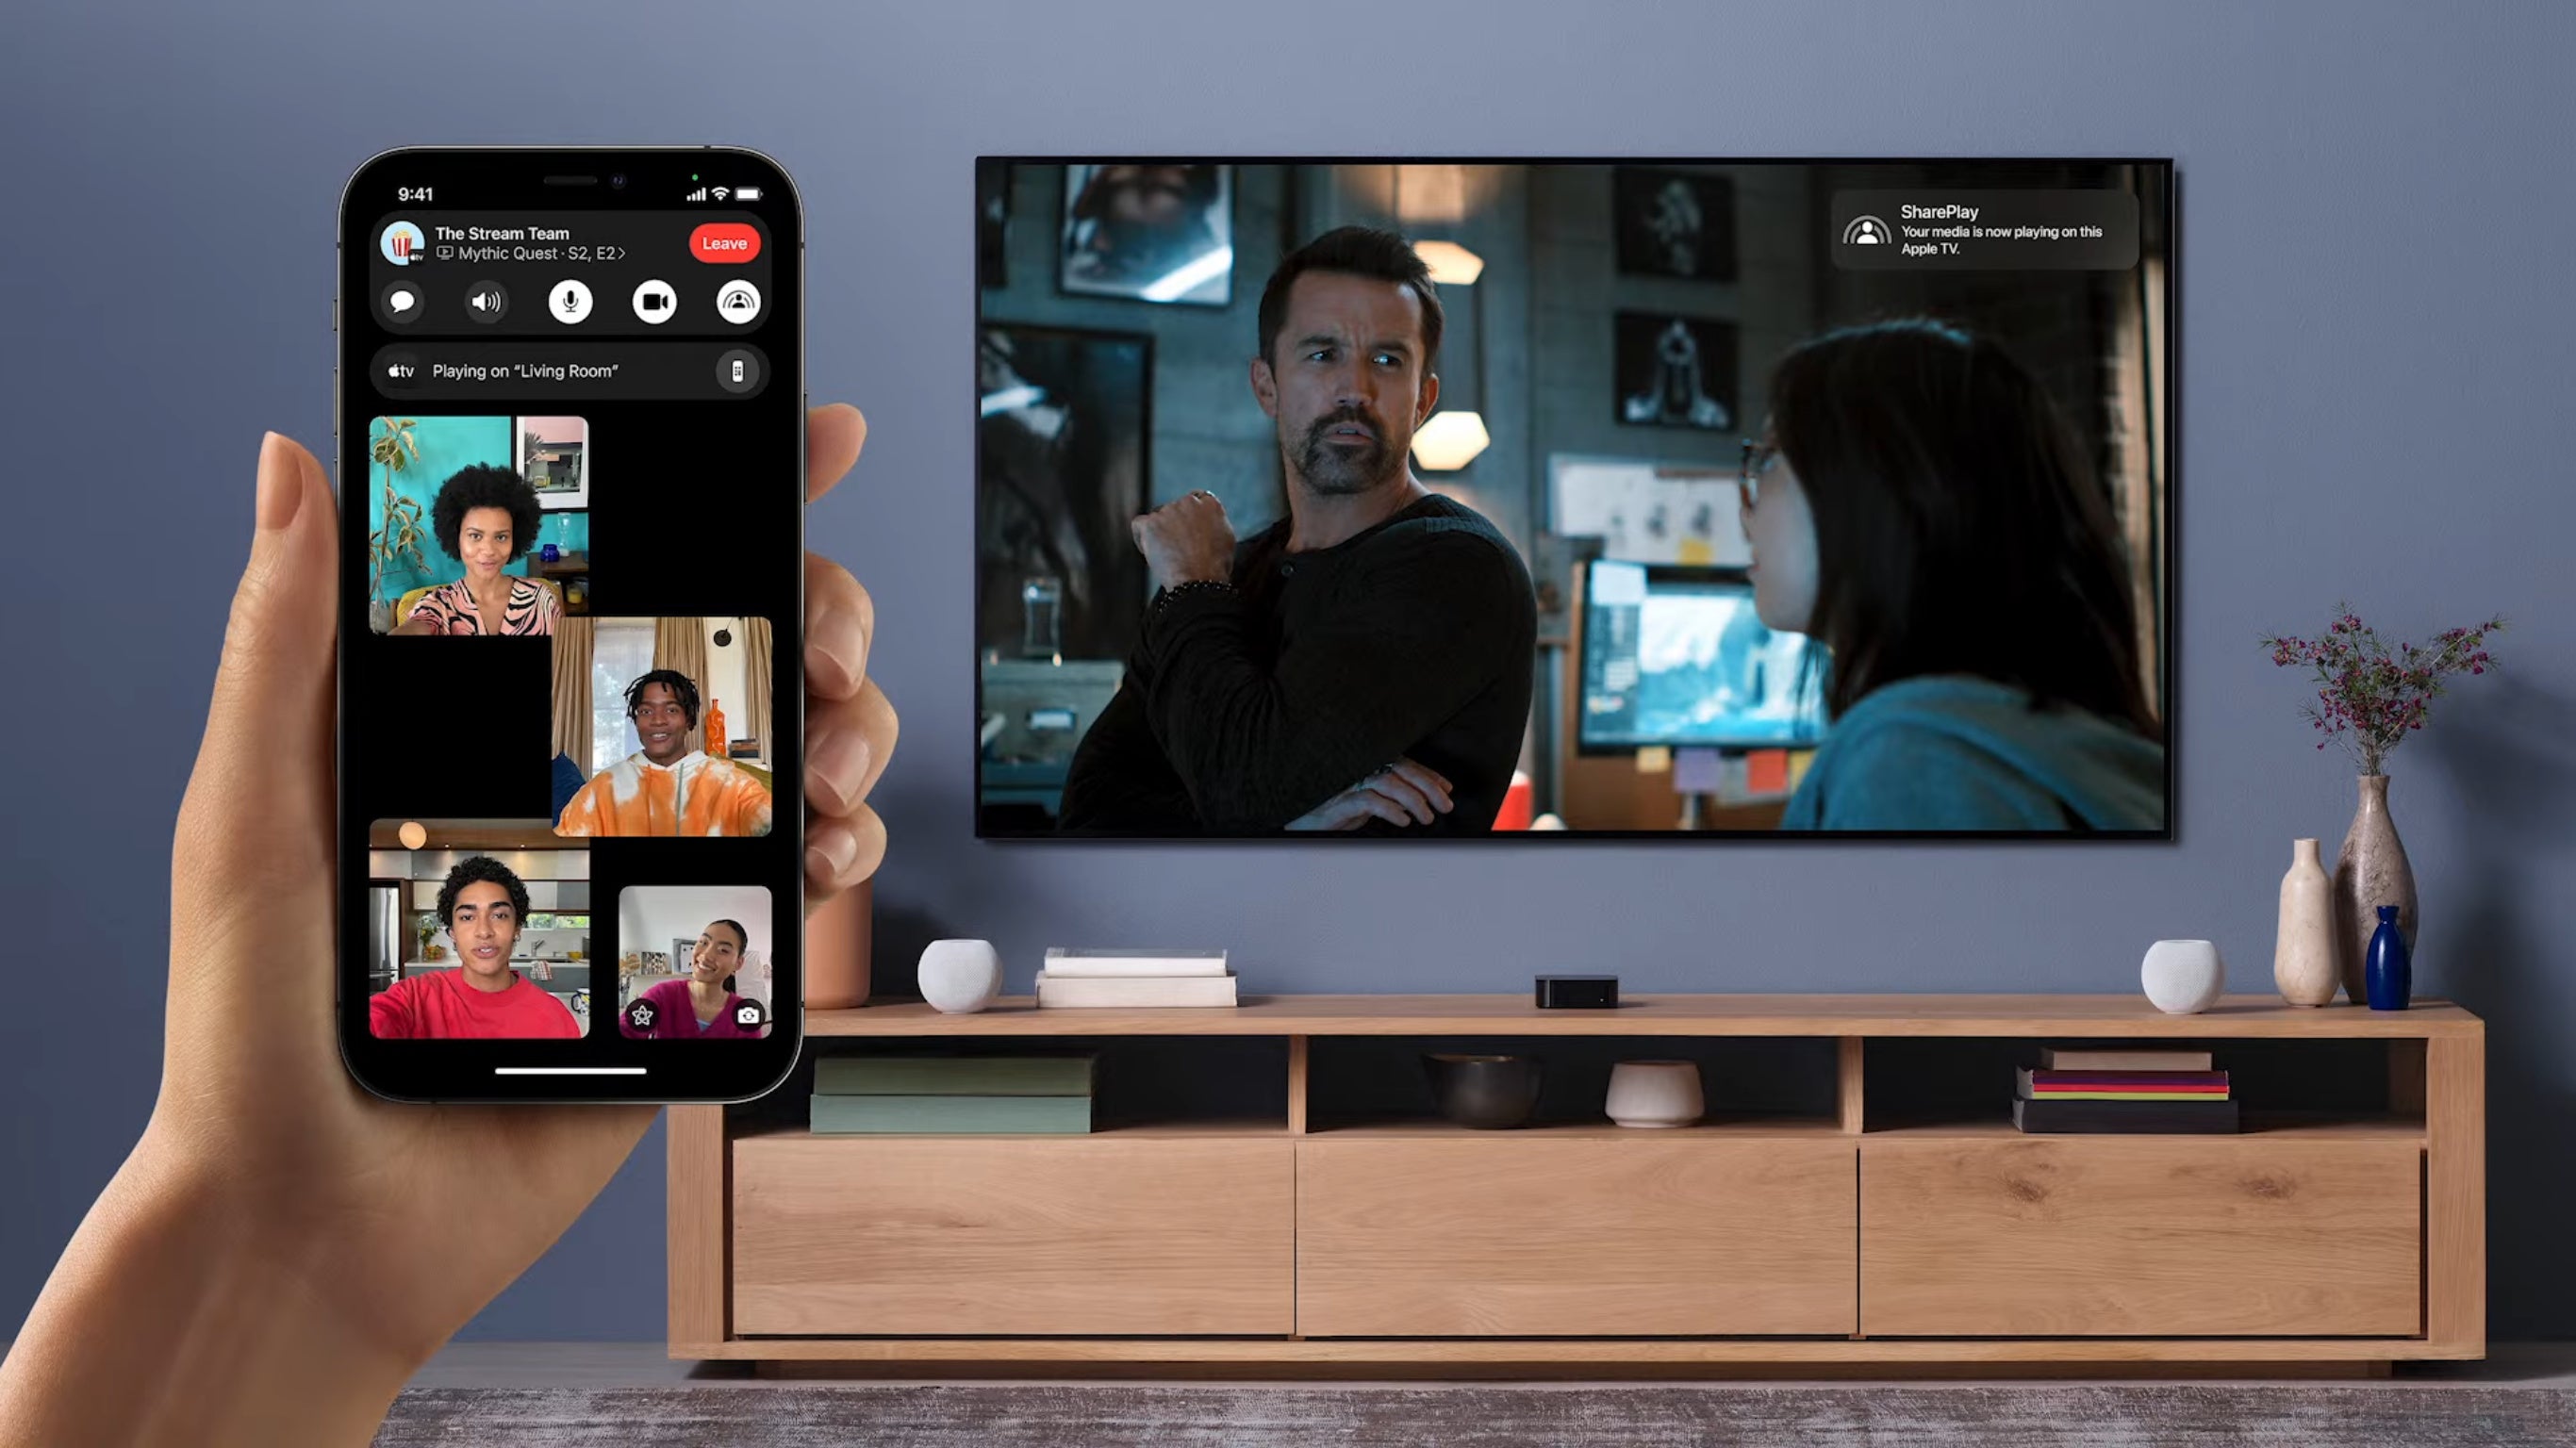 FaceTime gets tons of new features with iOS 15. Android users can join FaceTime calls